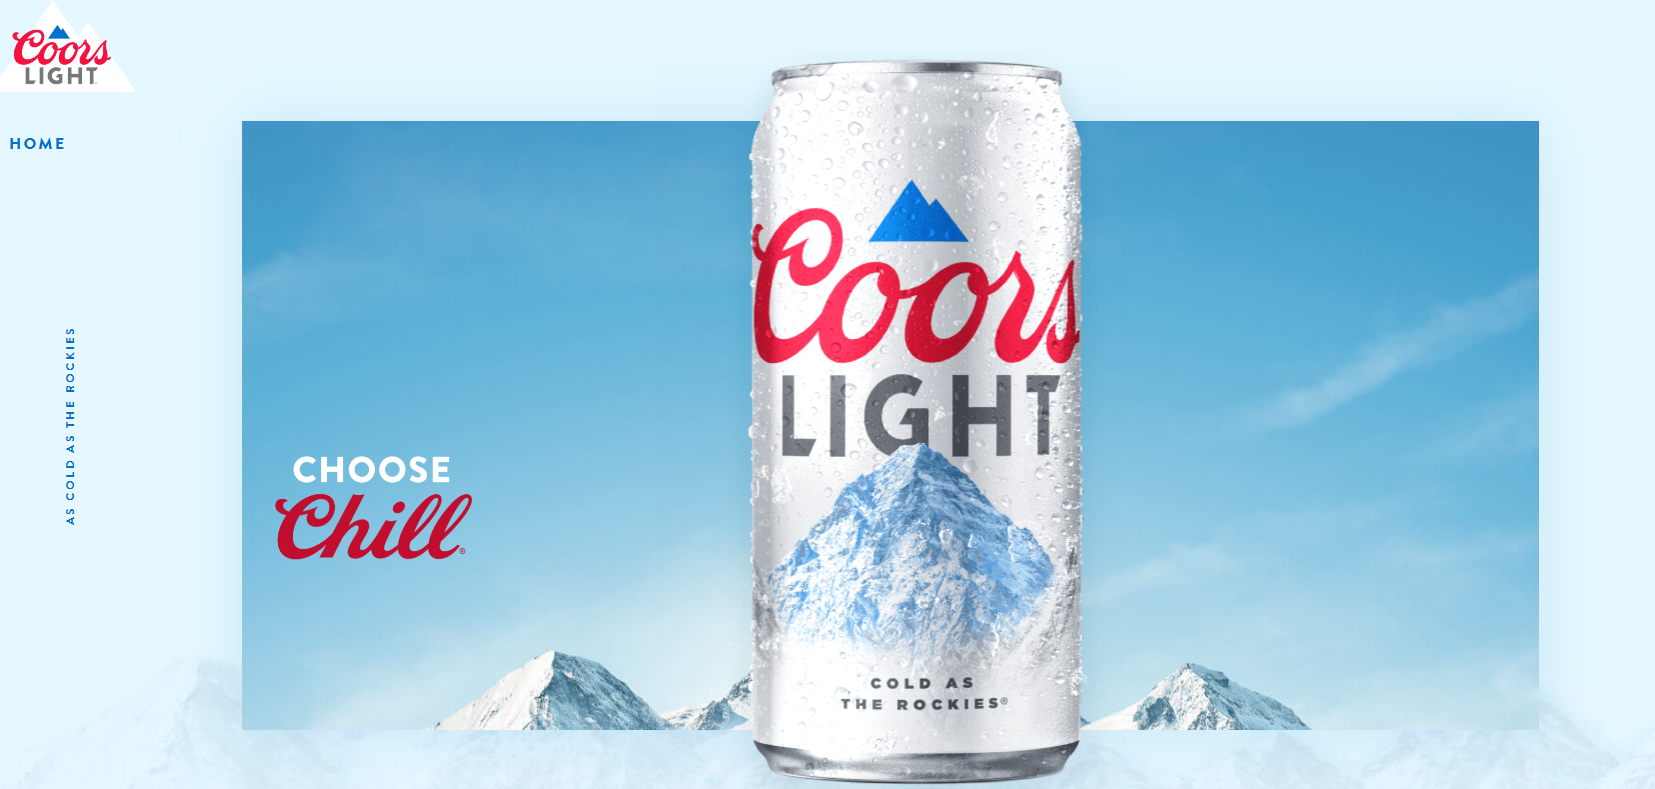 Current Coors Light Rebate Offers